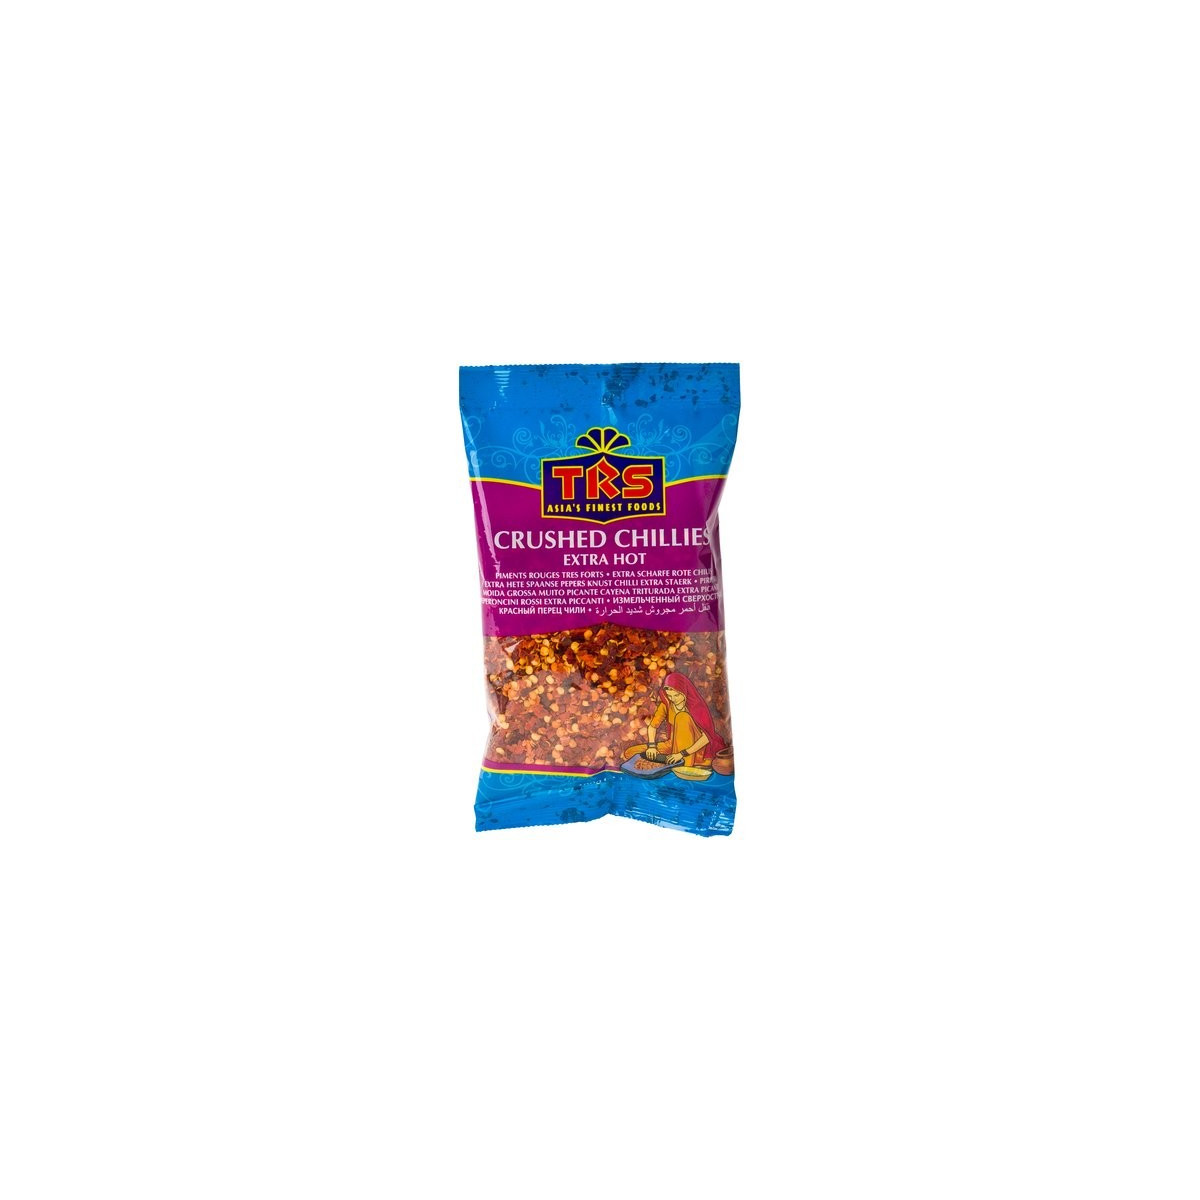 Crushed Chillies Extra Hot 100g - TRS